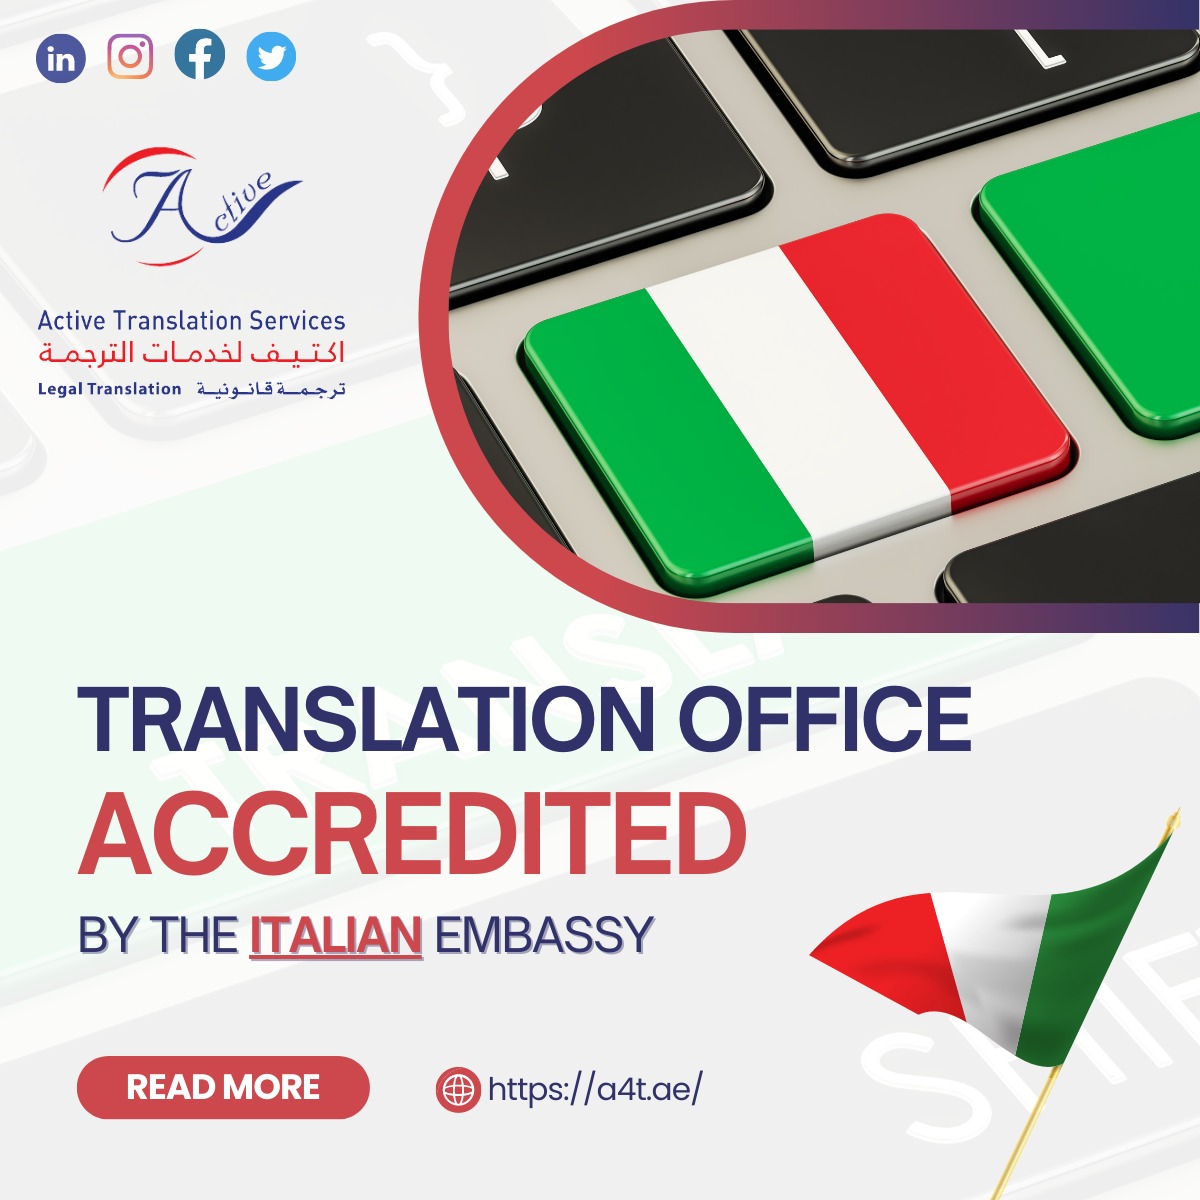 Translation office accredited by the Italian Embassy